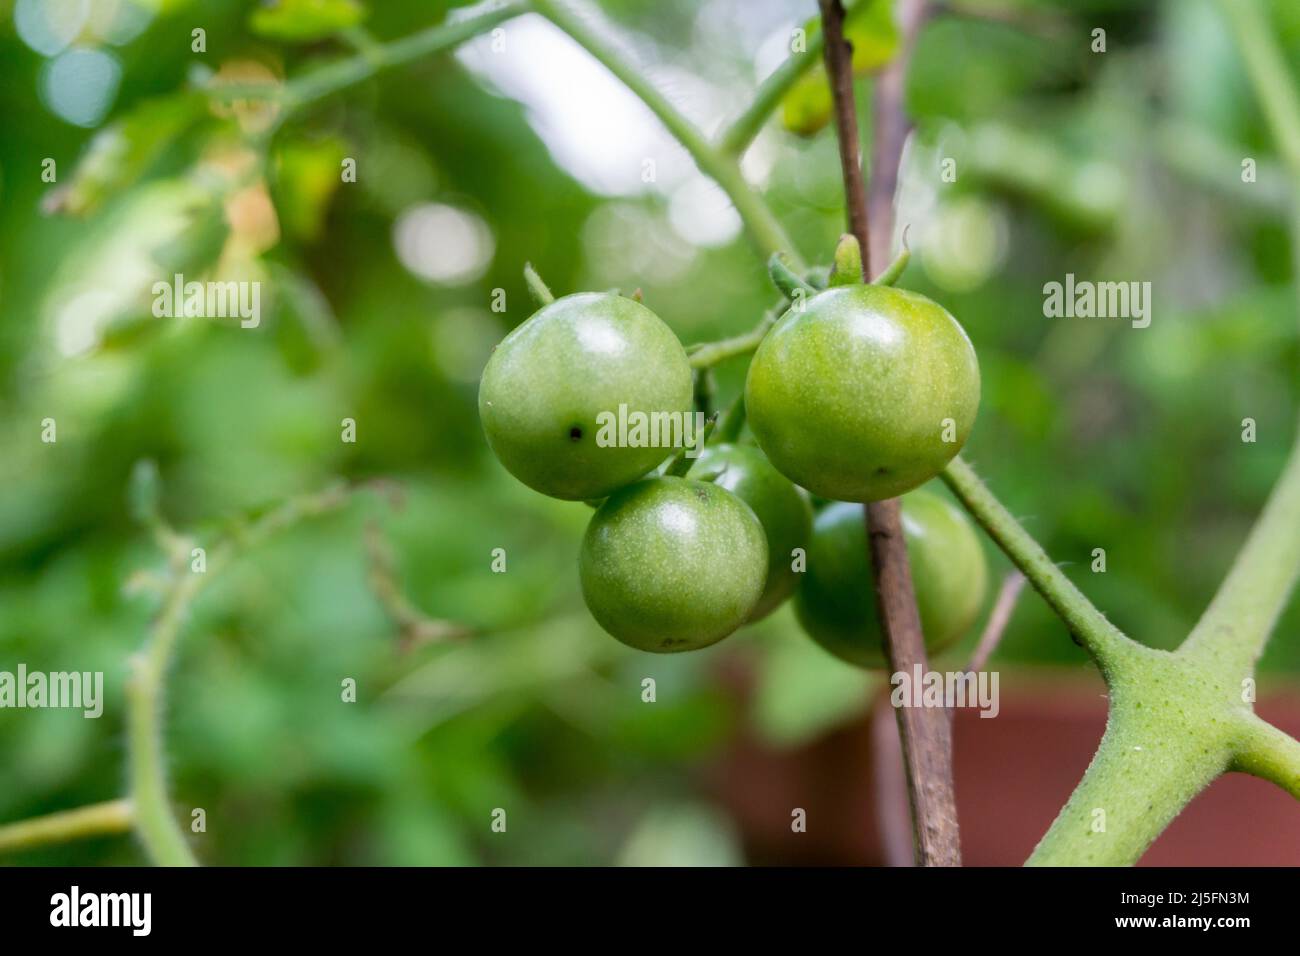 A closeup shot of raw cherry tomatoes. its is a type of small round tomato believed to be an intermediate genetic admixture between wild currant-type Stock Photo